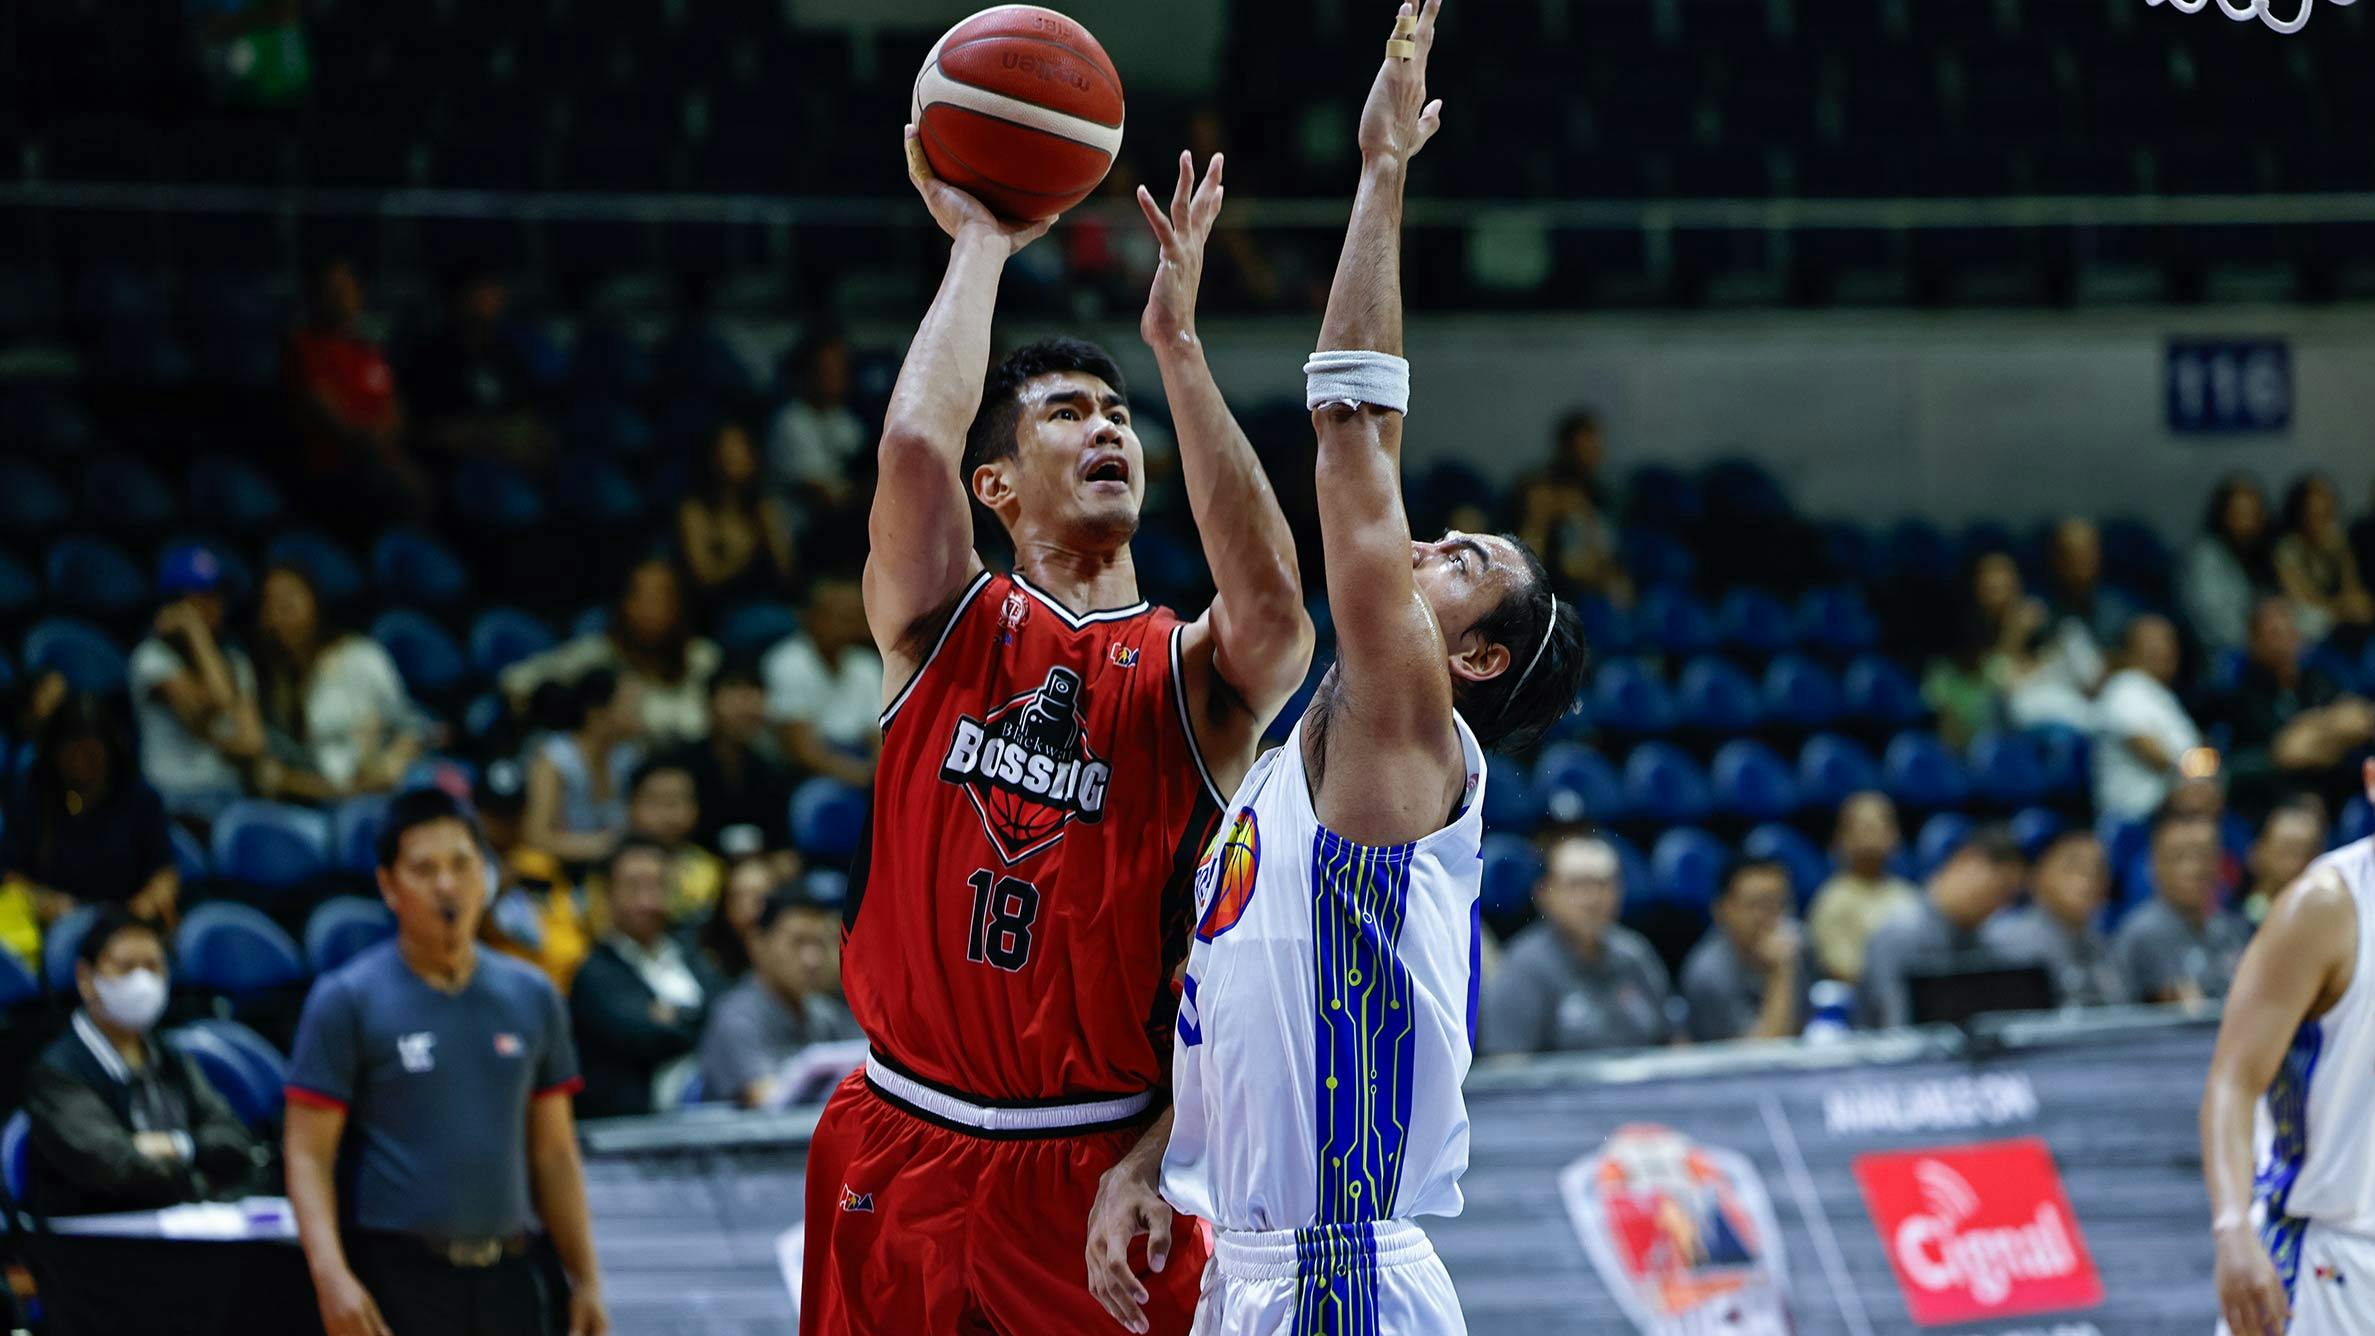 PBA: Jeff Cariaso all praises for ‘main guy’ Troy Rosario as Blackwater has perfect start to Philippine Cup